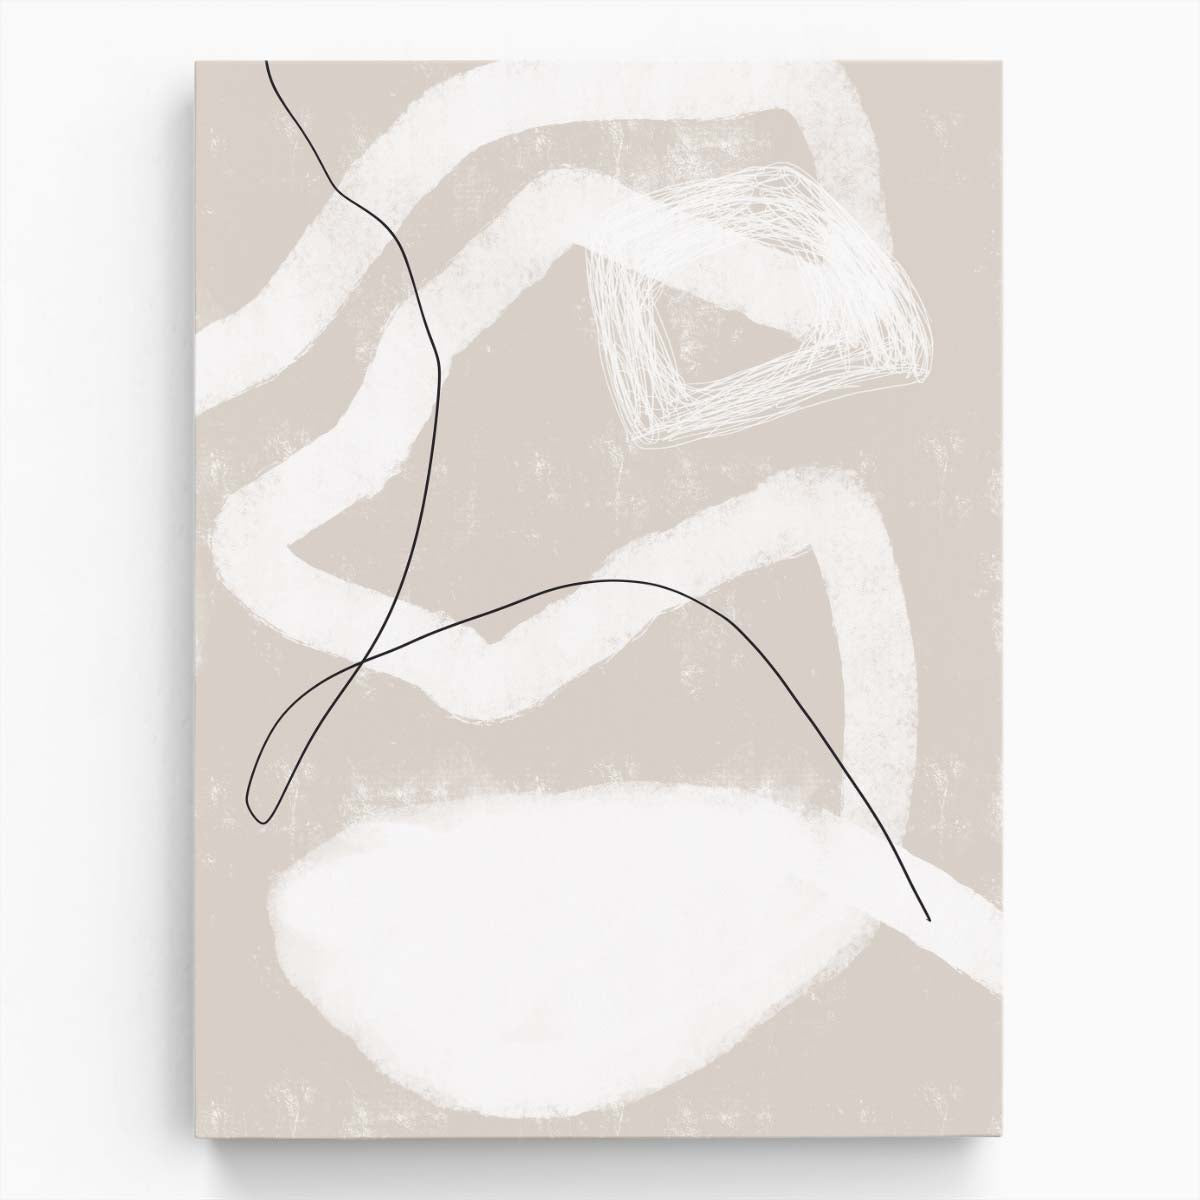 Abstract Beige Line Illustration Art by Uplusmestudio - Black & White Graphics by Luxuriance Designs, made in USA